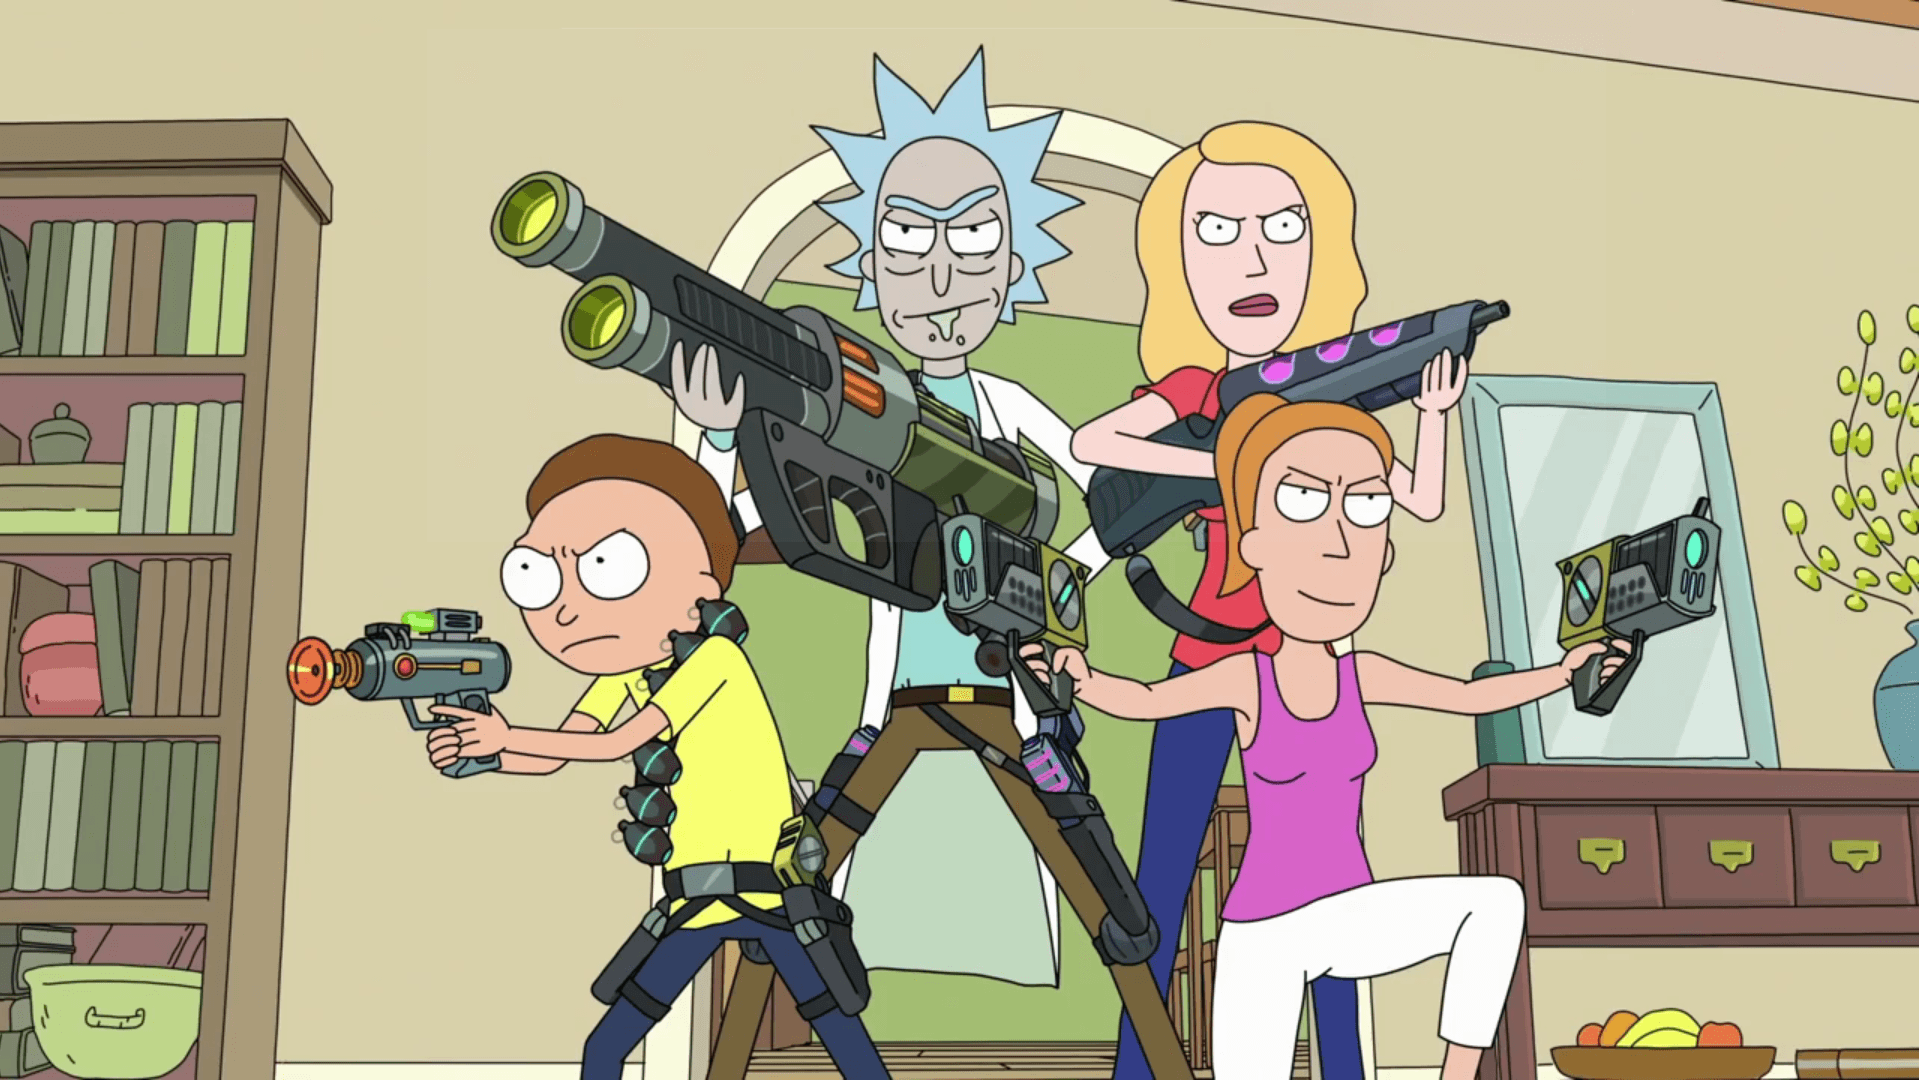 Any cool Rick and Morty wallpaper?